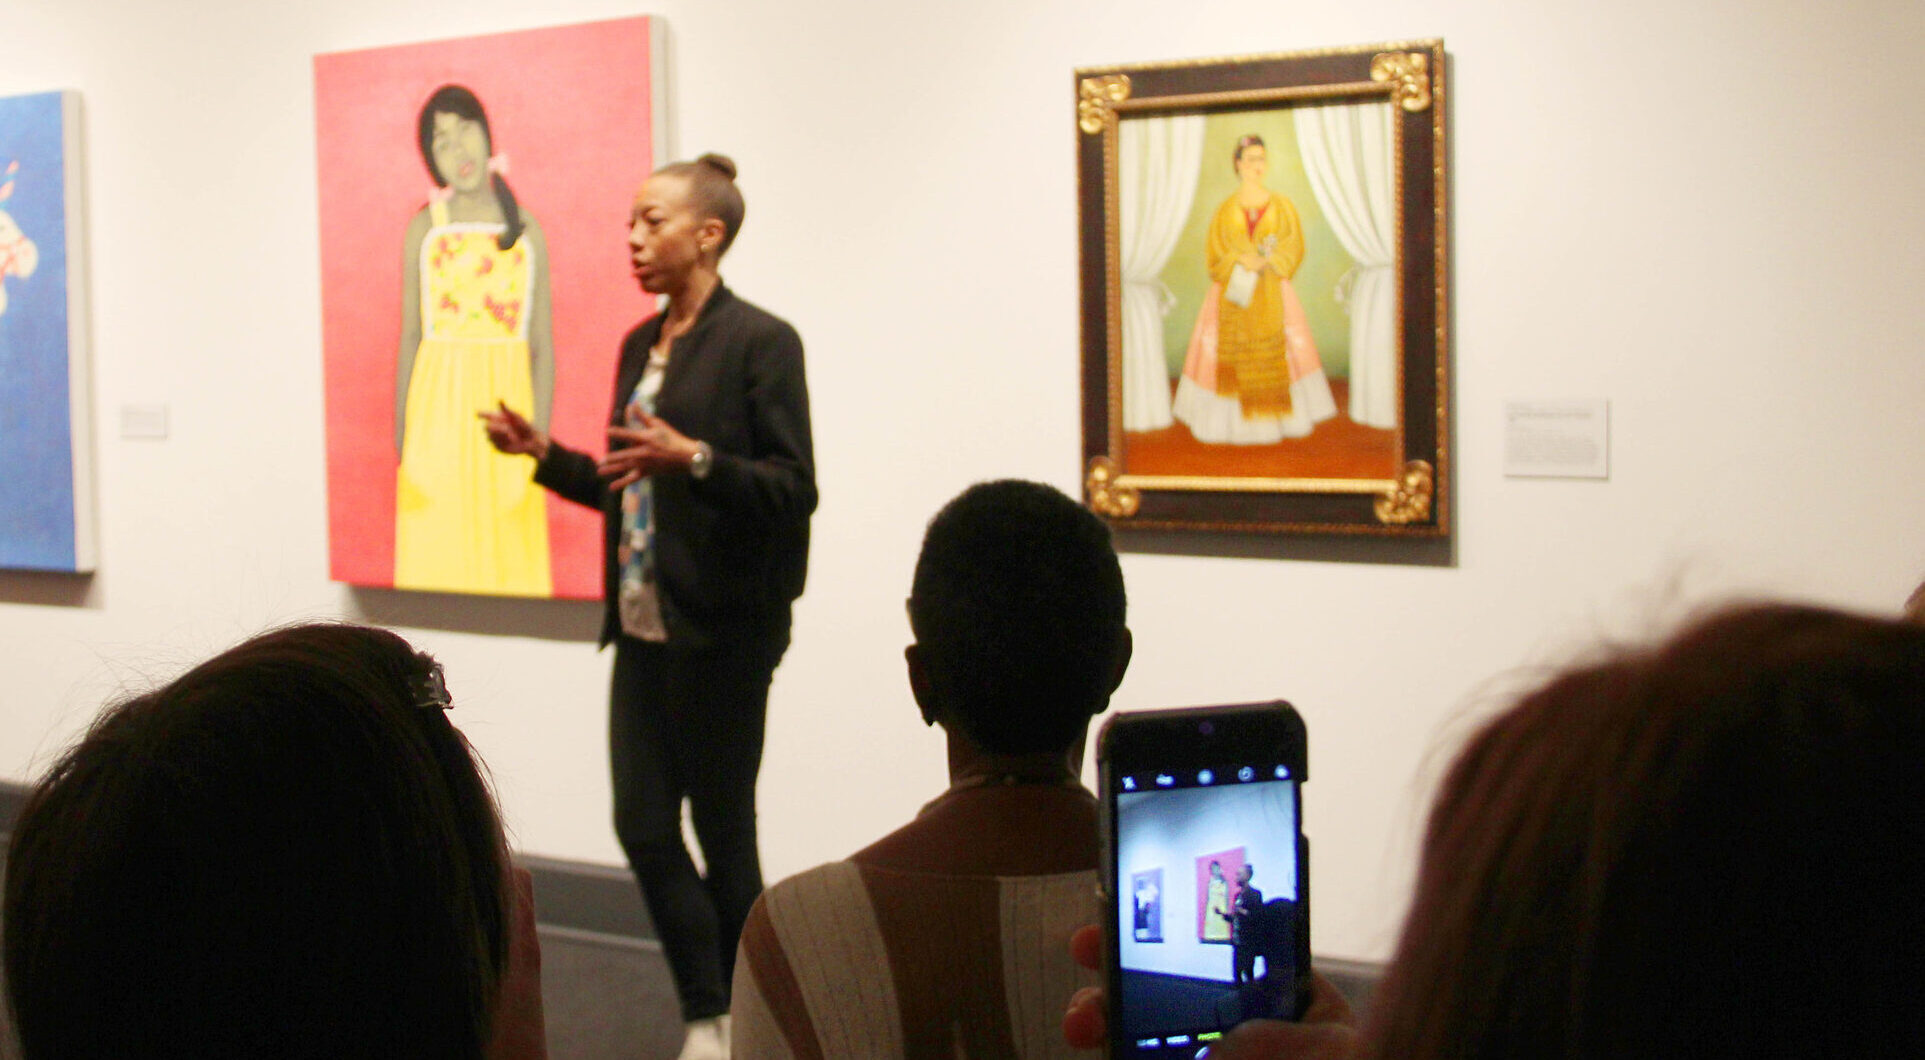 Smartphone filming of a darker skinned woman artist talking in front of her pink and yellow artwork in the museum gallery.